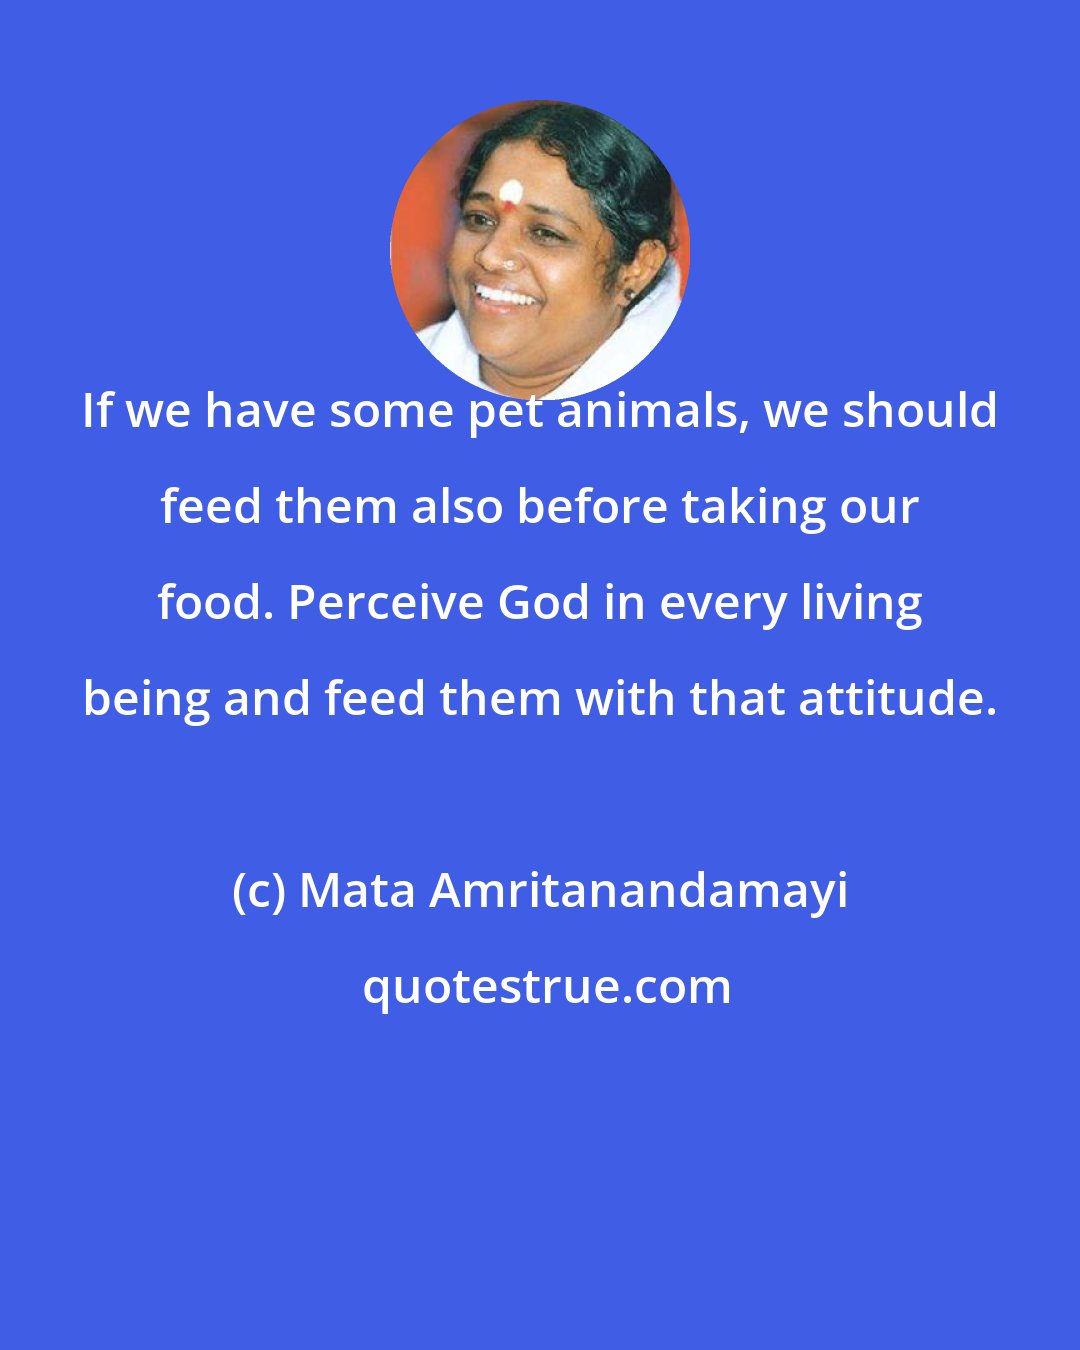 Mata Amritanandamayi: If we have some pet animals, we should feed them also before taking our food. Perceive God in every living being and feed them with that attitude.